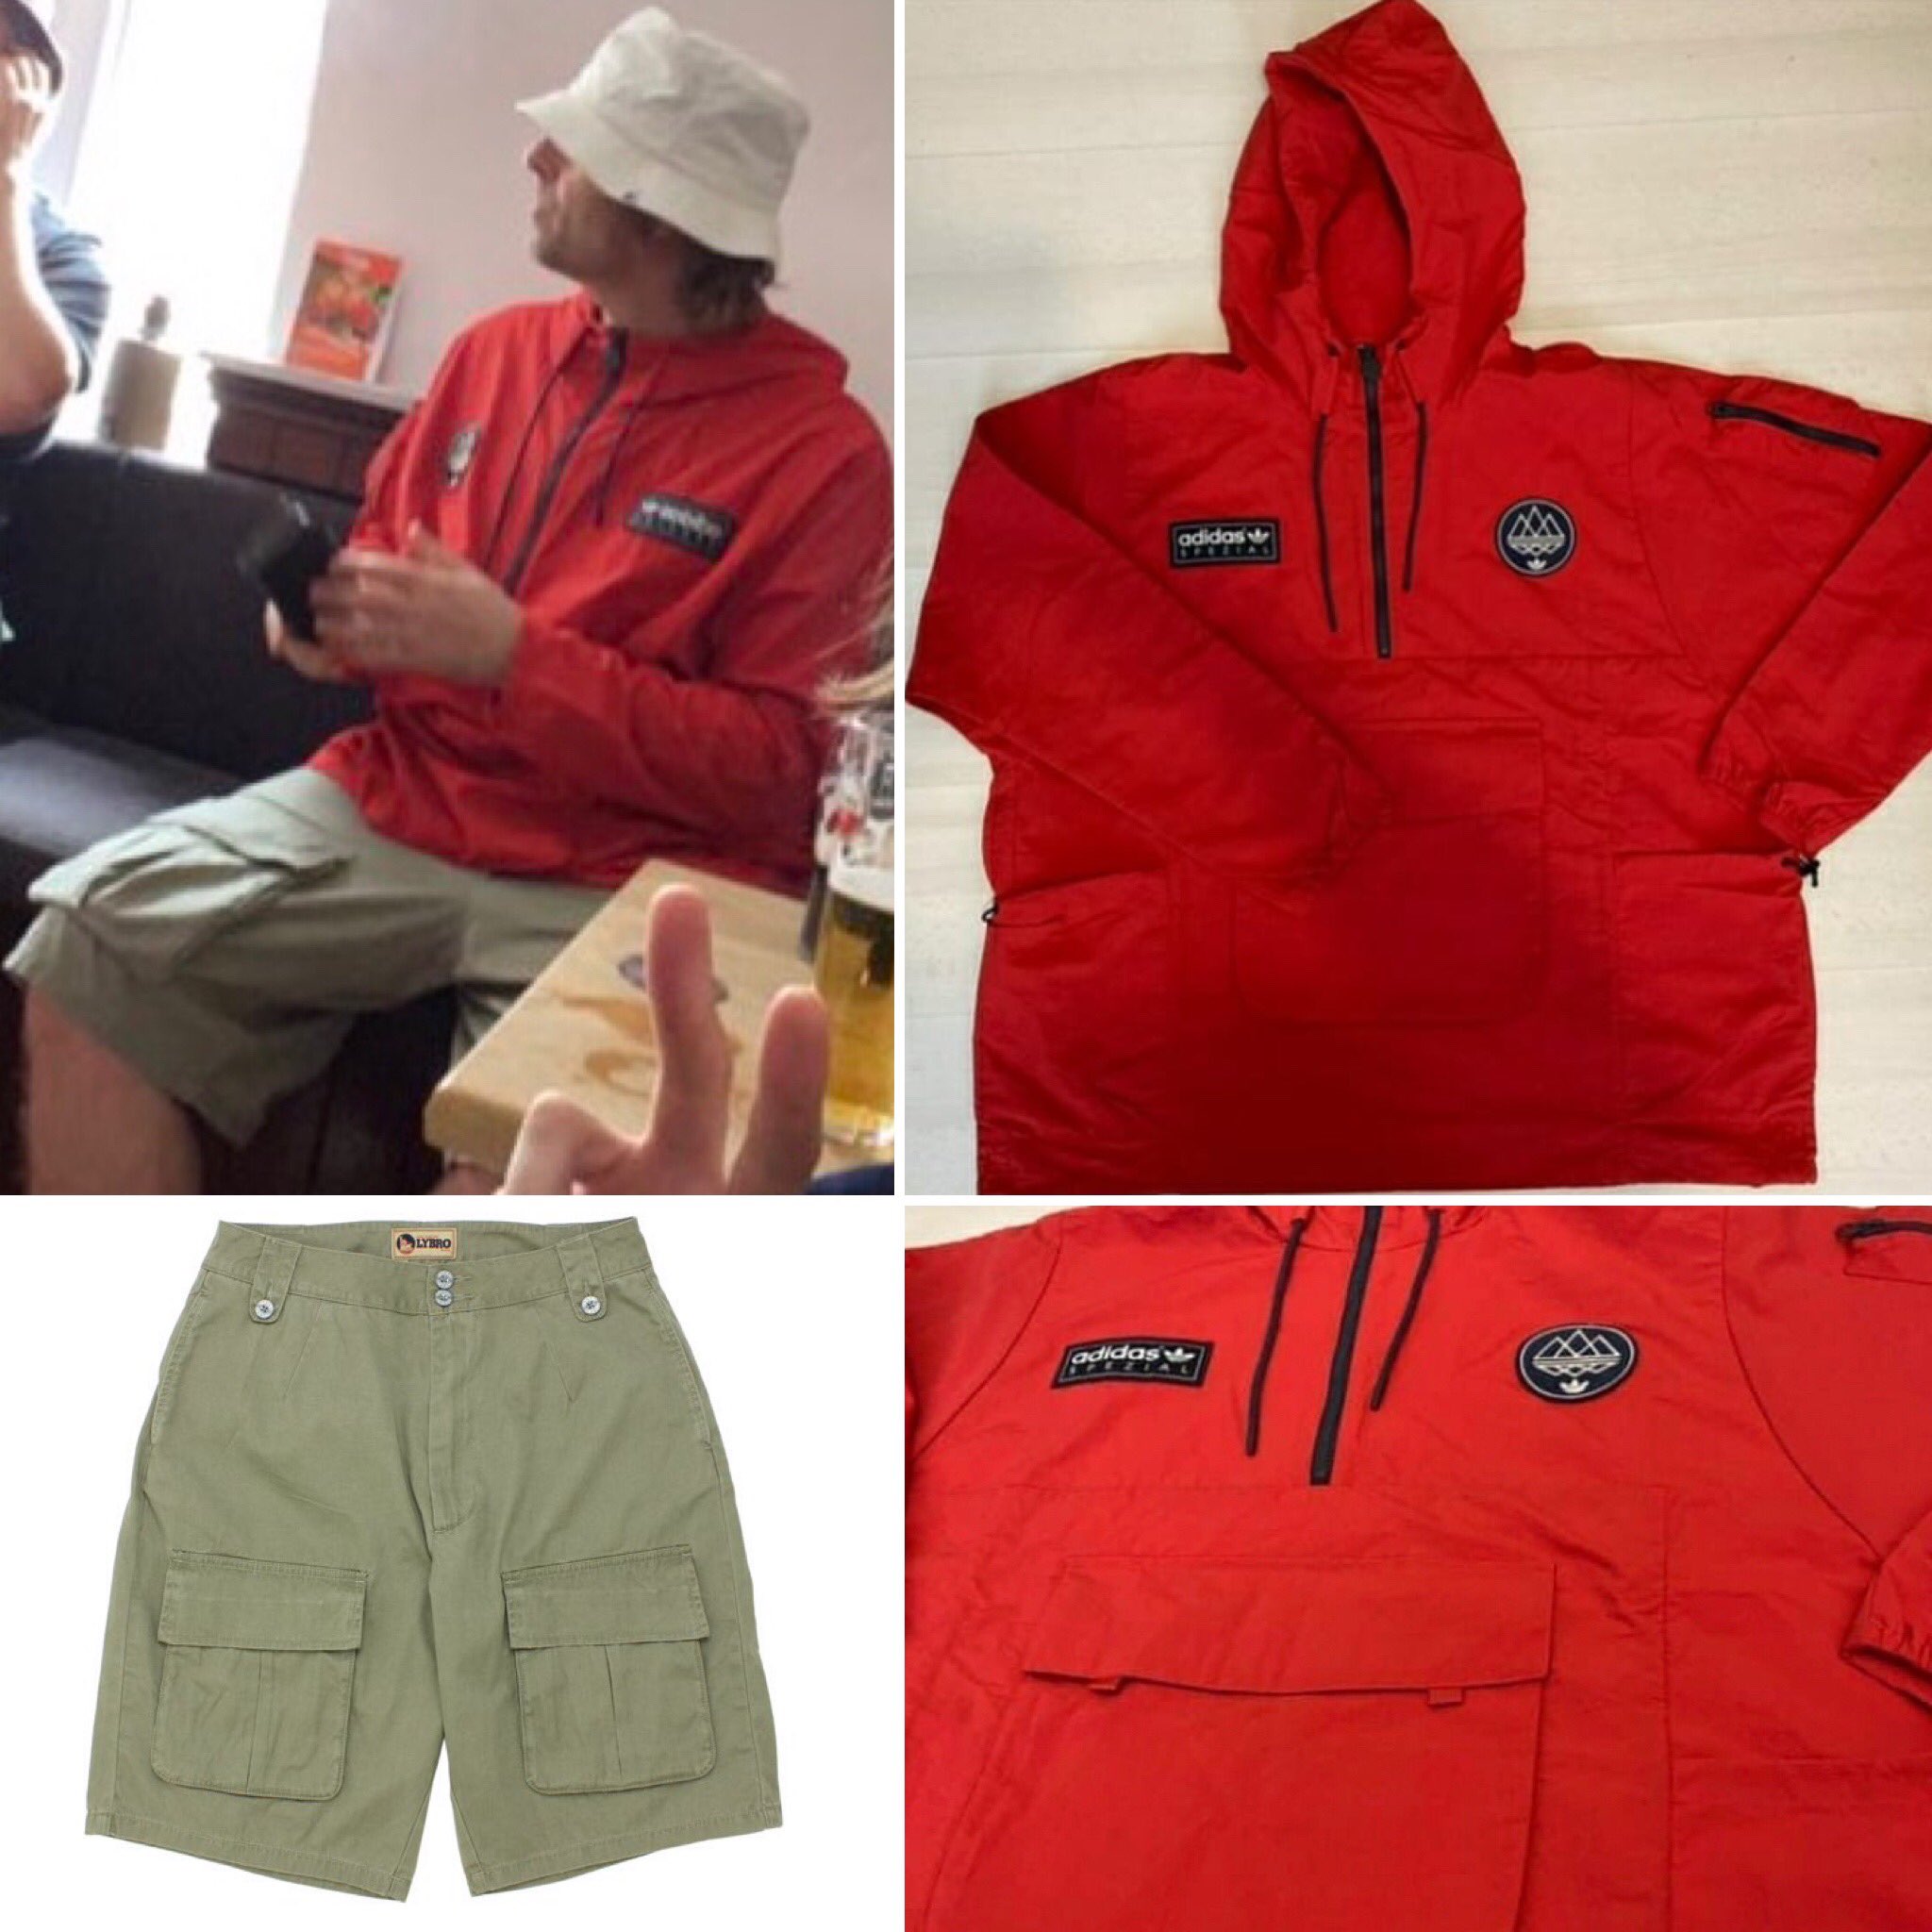 Gallagher Wears on Twitter: Gallagher wears adidas Spezial Todmorden smock & Cabourn Lybro combat shorts / Twitter